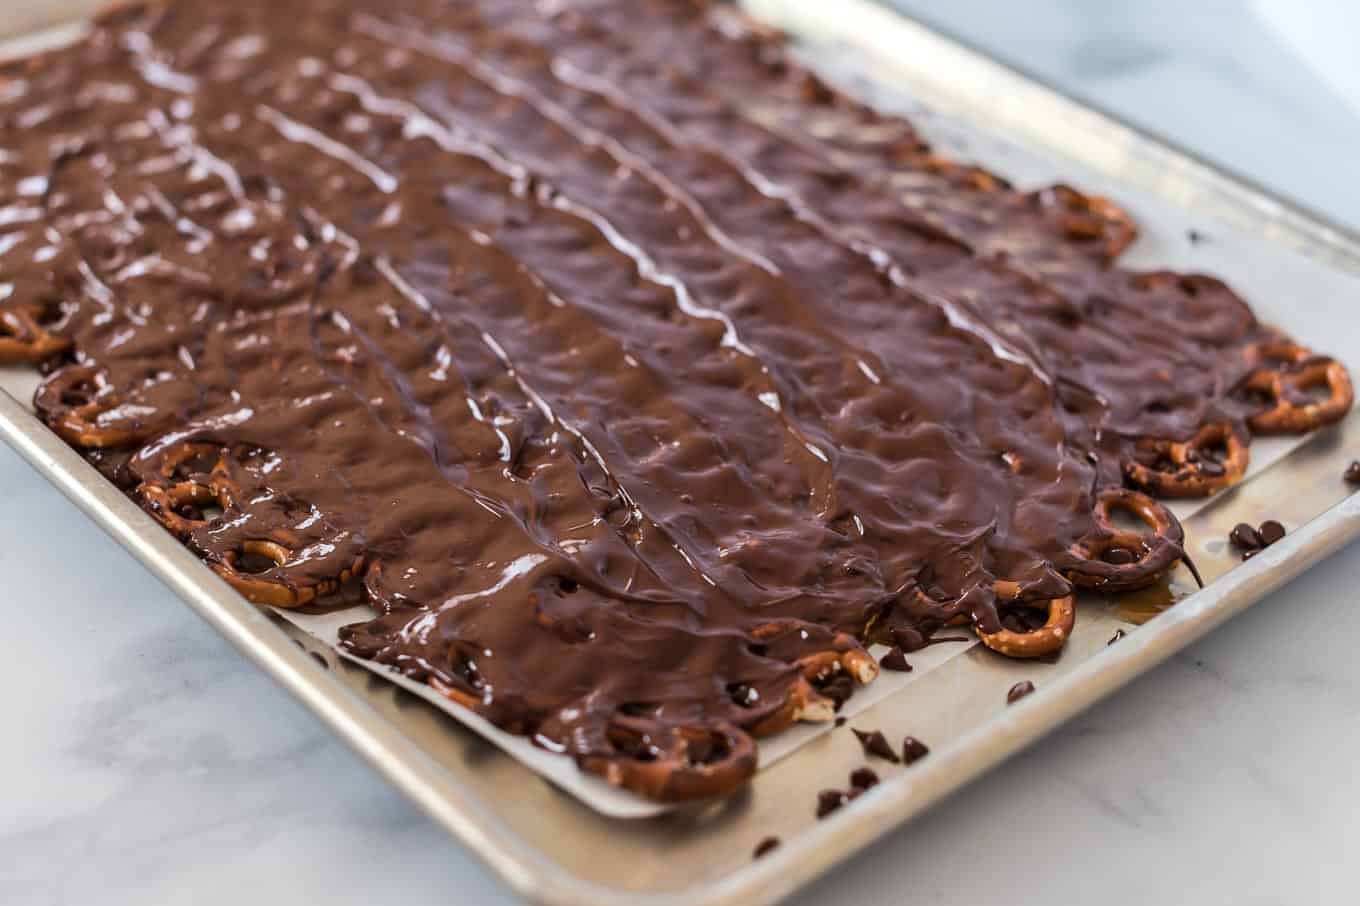 melted chocolate spread over pretzels on a baking sheet